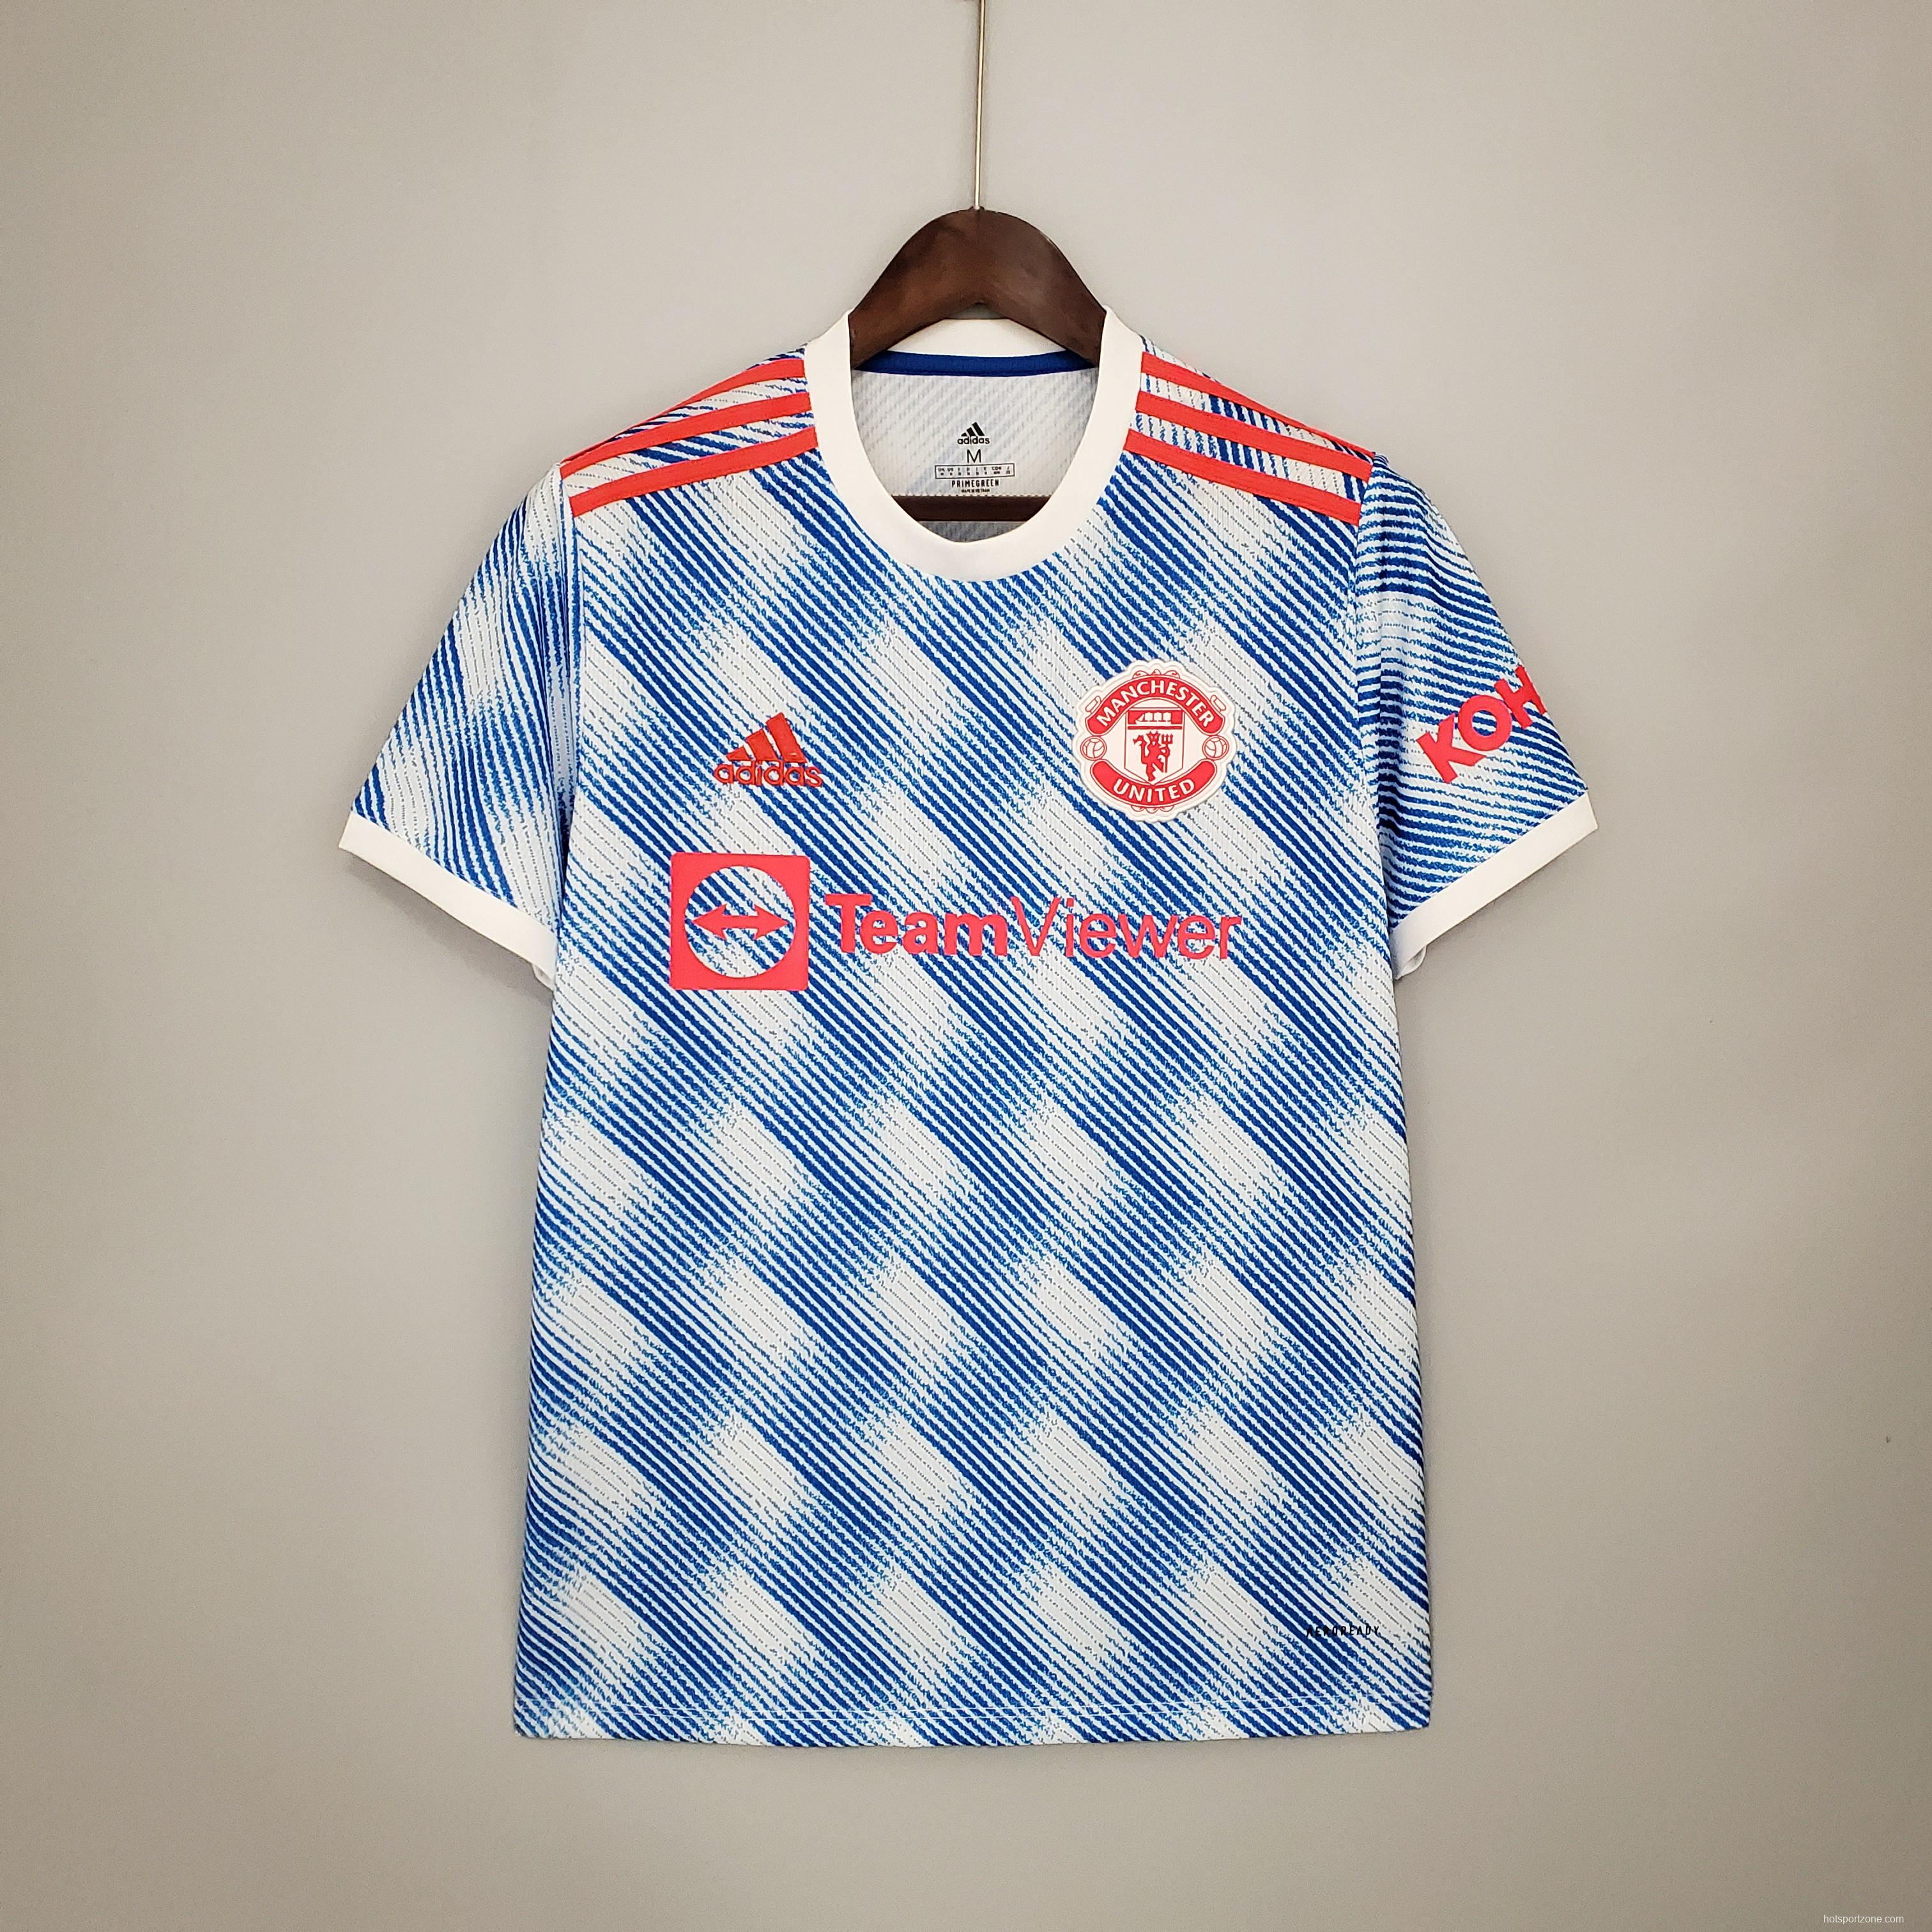 21/22 Manchester United away Soccer Jersey